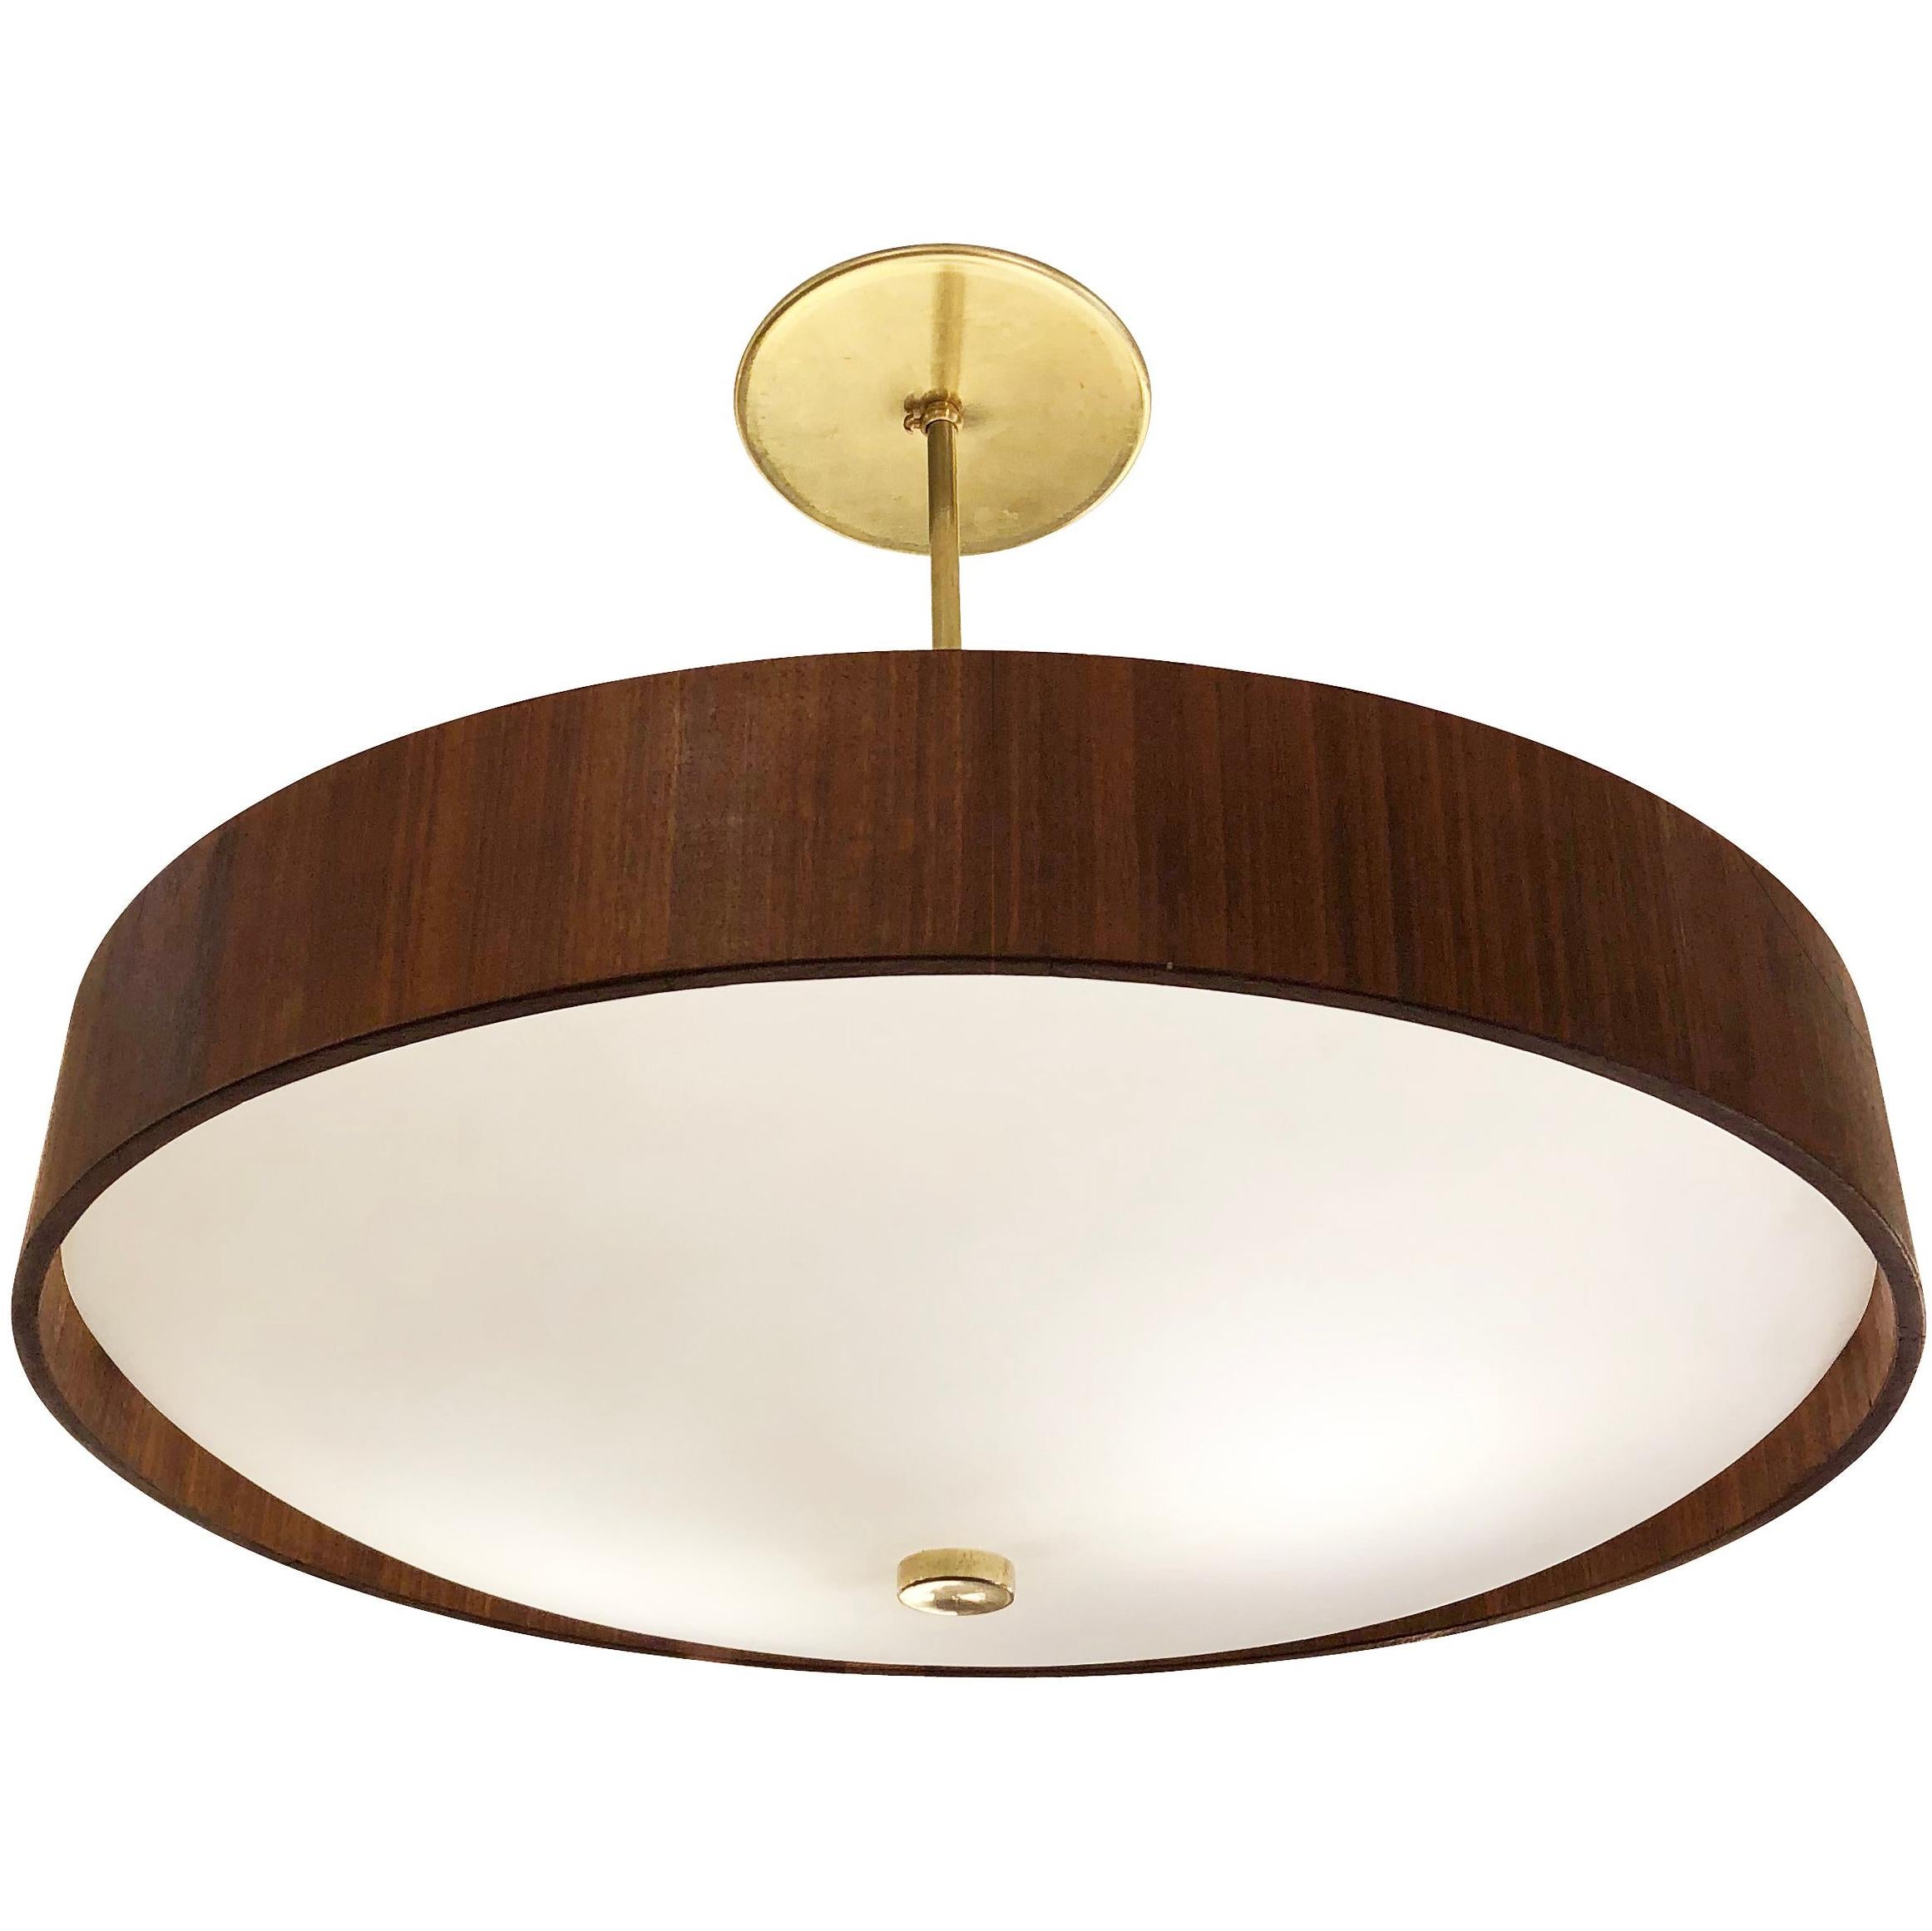 Midcentury Saucer Chandelier with Wood Ring